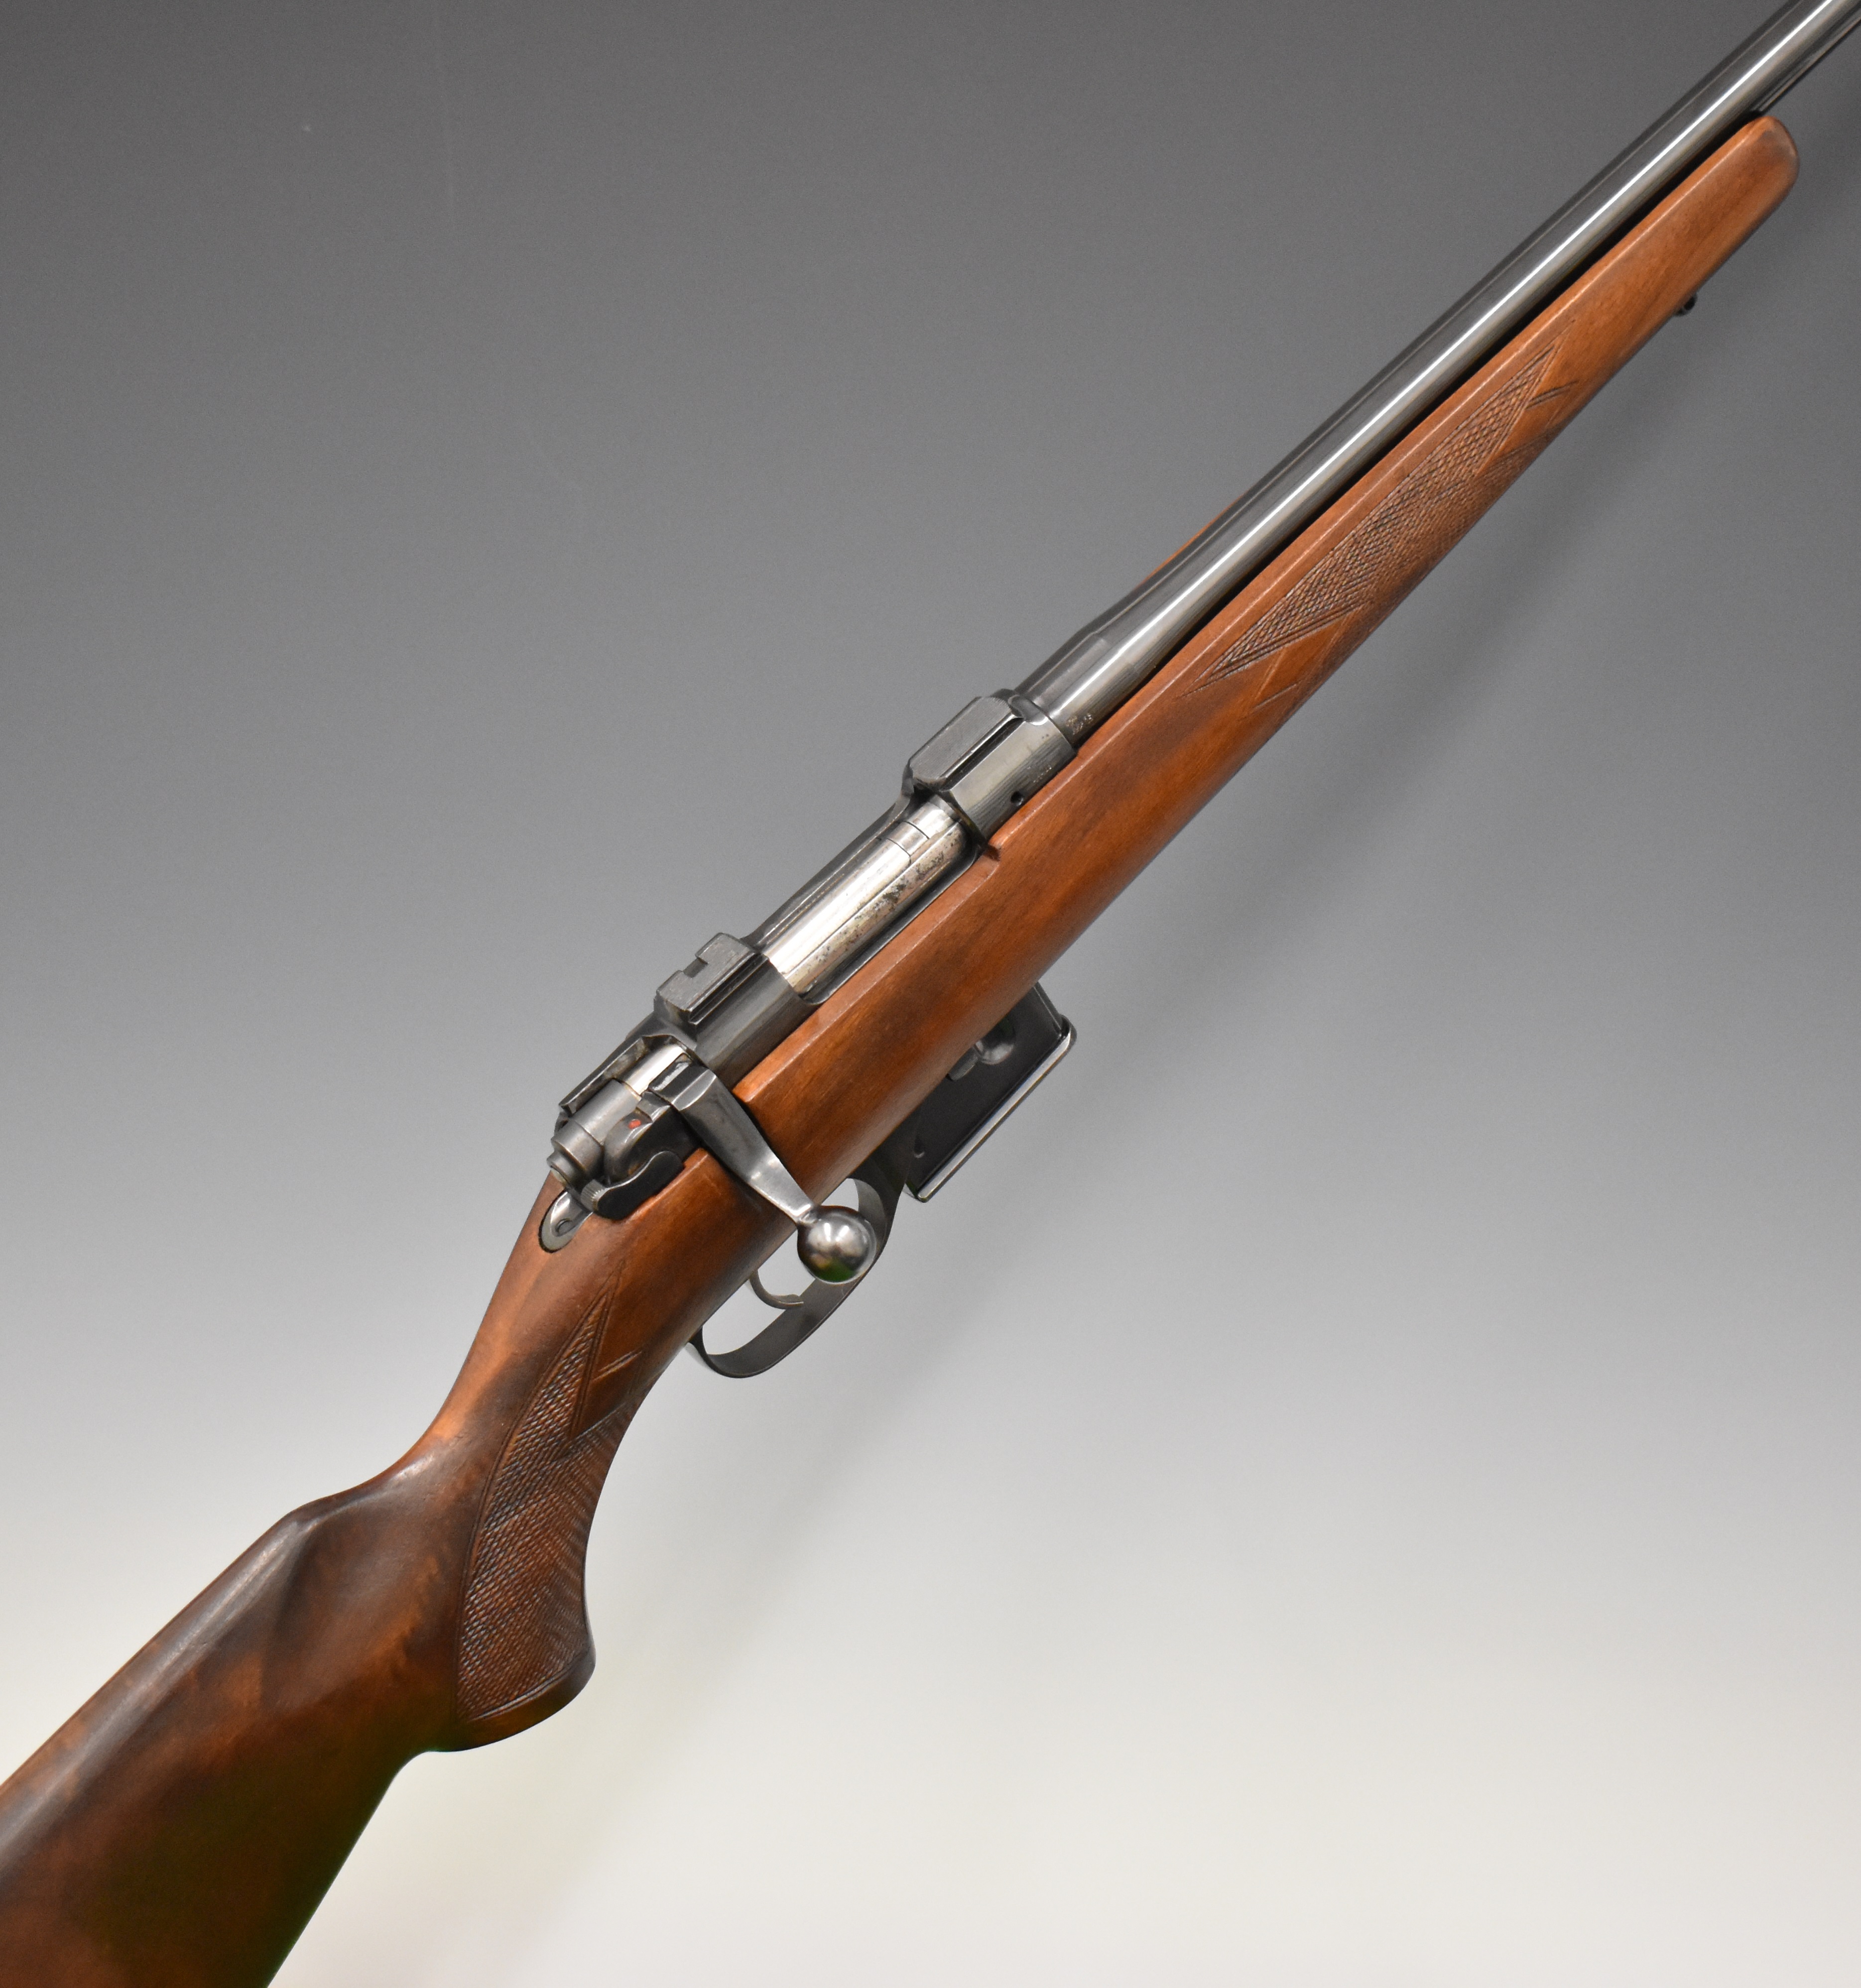 CZ 527 American .222 Remington bolt-action rifle with chequered semi-pistol grip and forend, sling